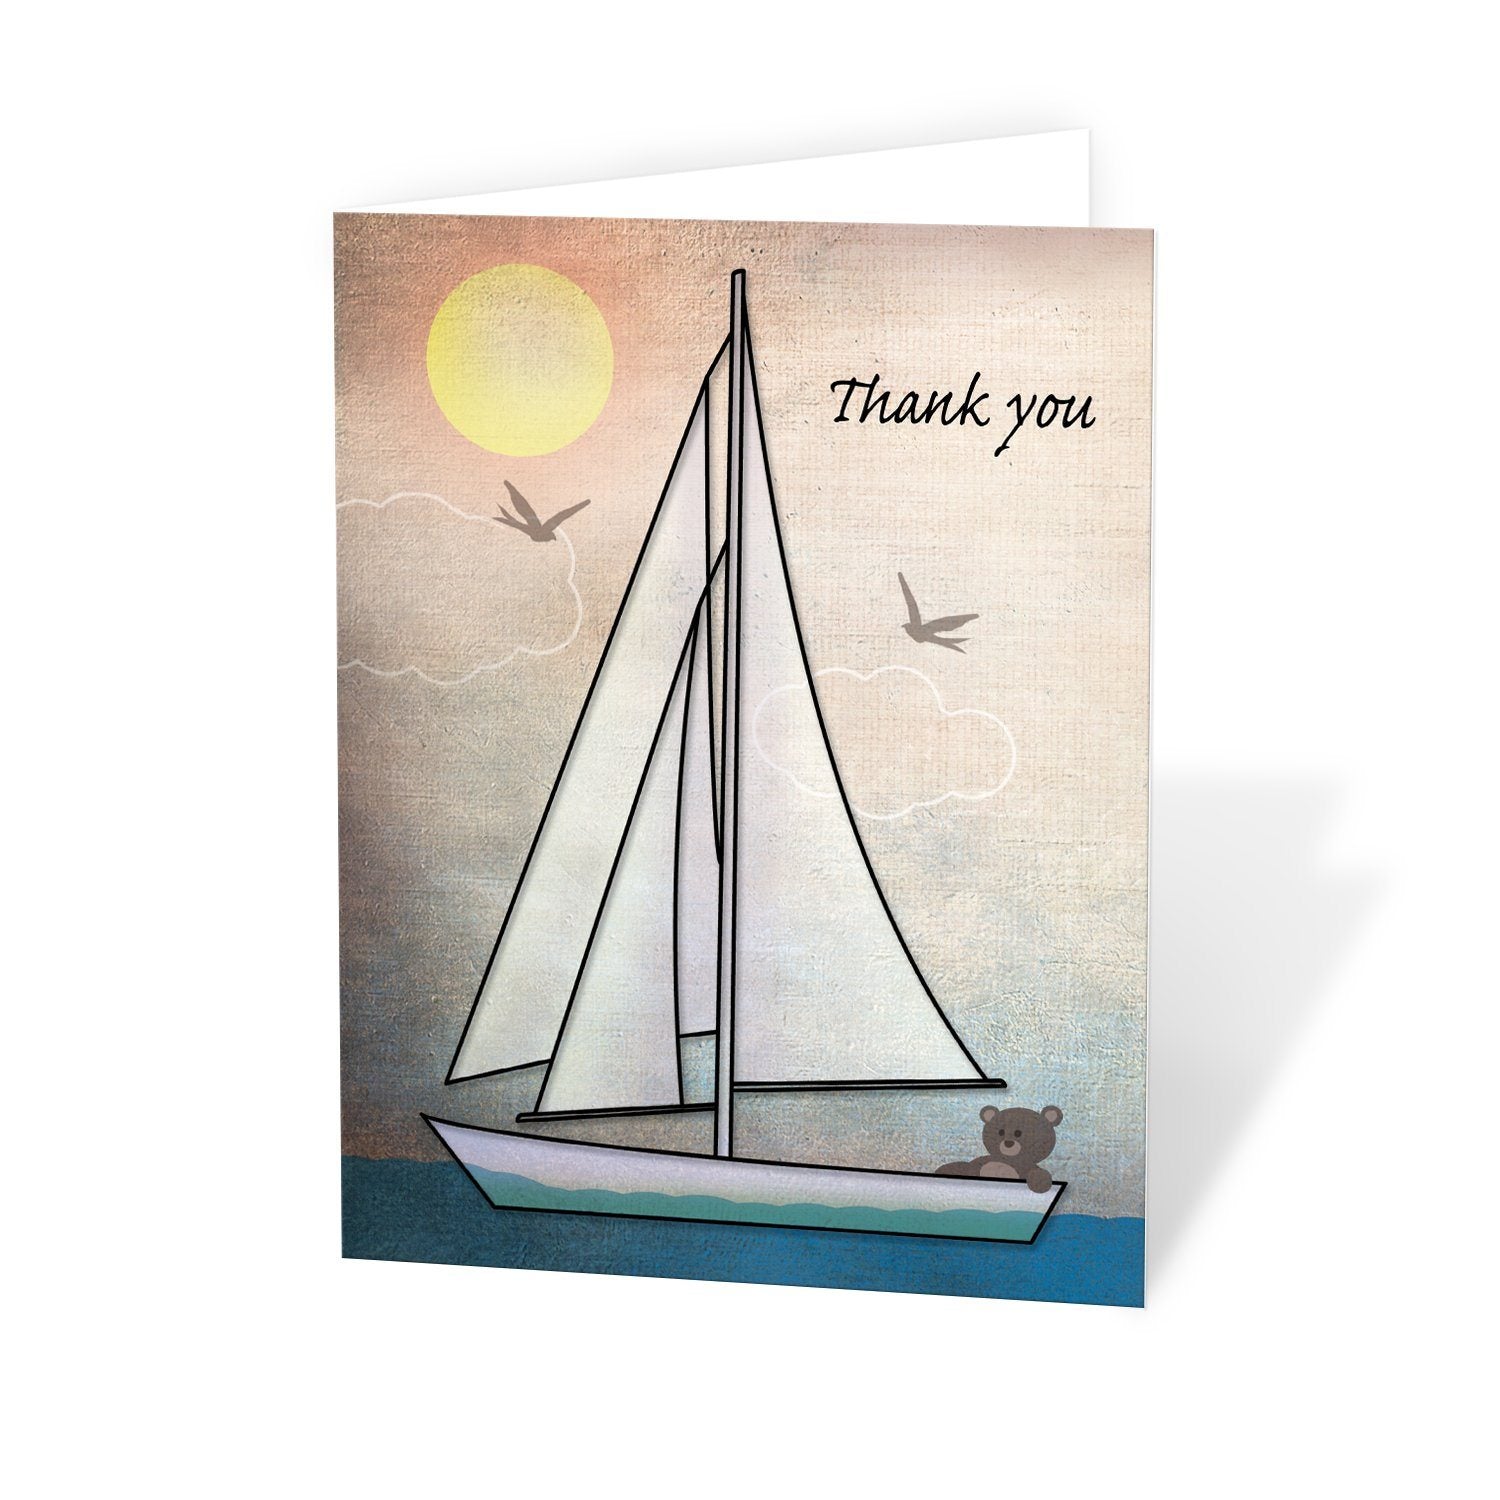 Rustic Nautical Teddy Bear Sailboat Thank You Cards at Artistically Invited